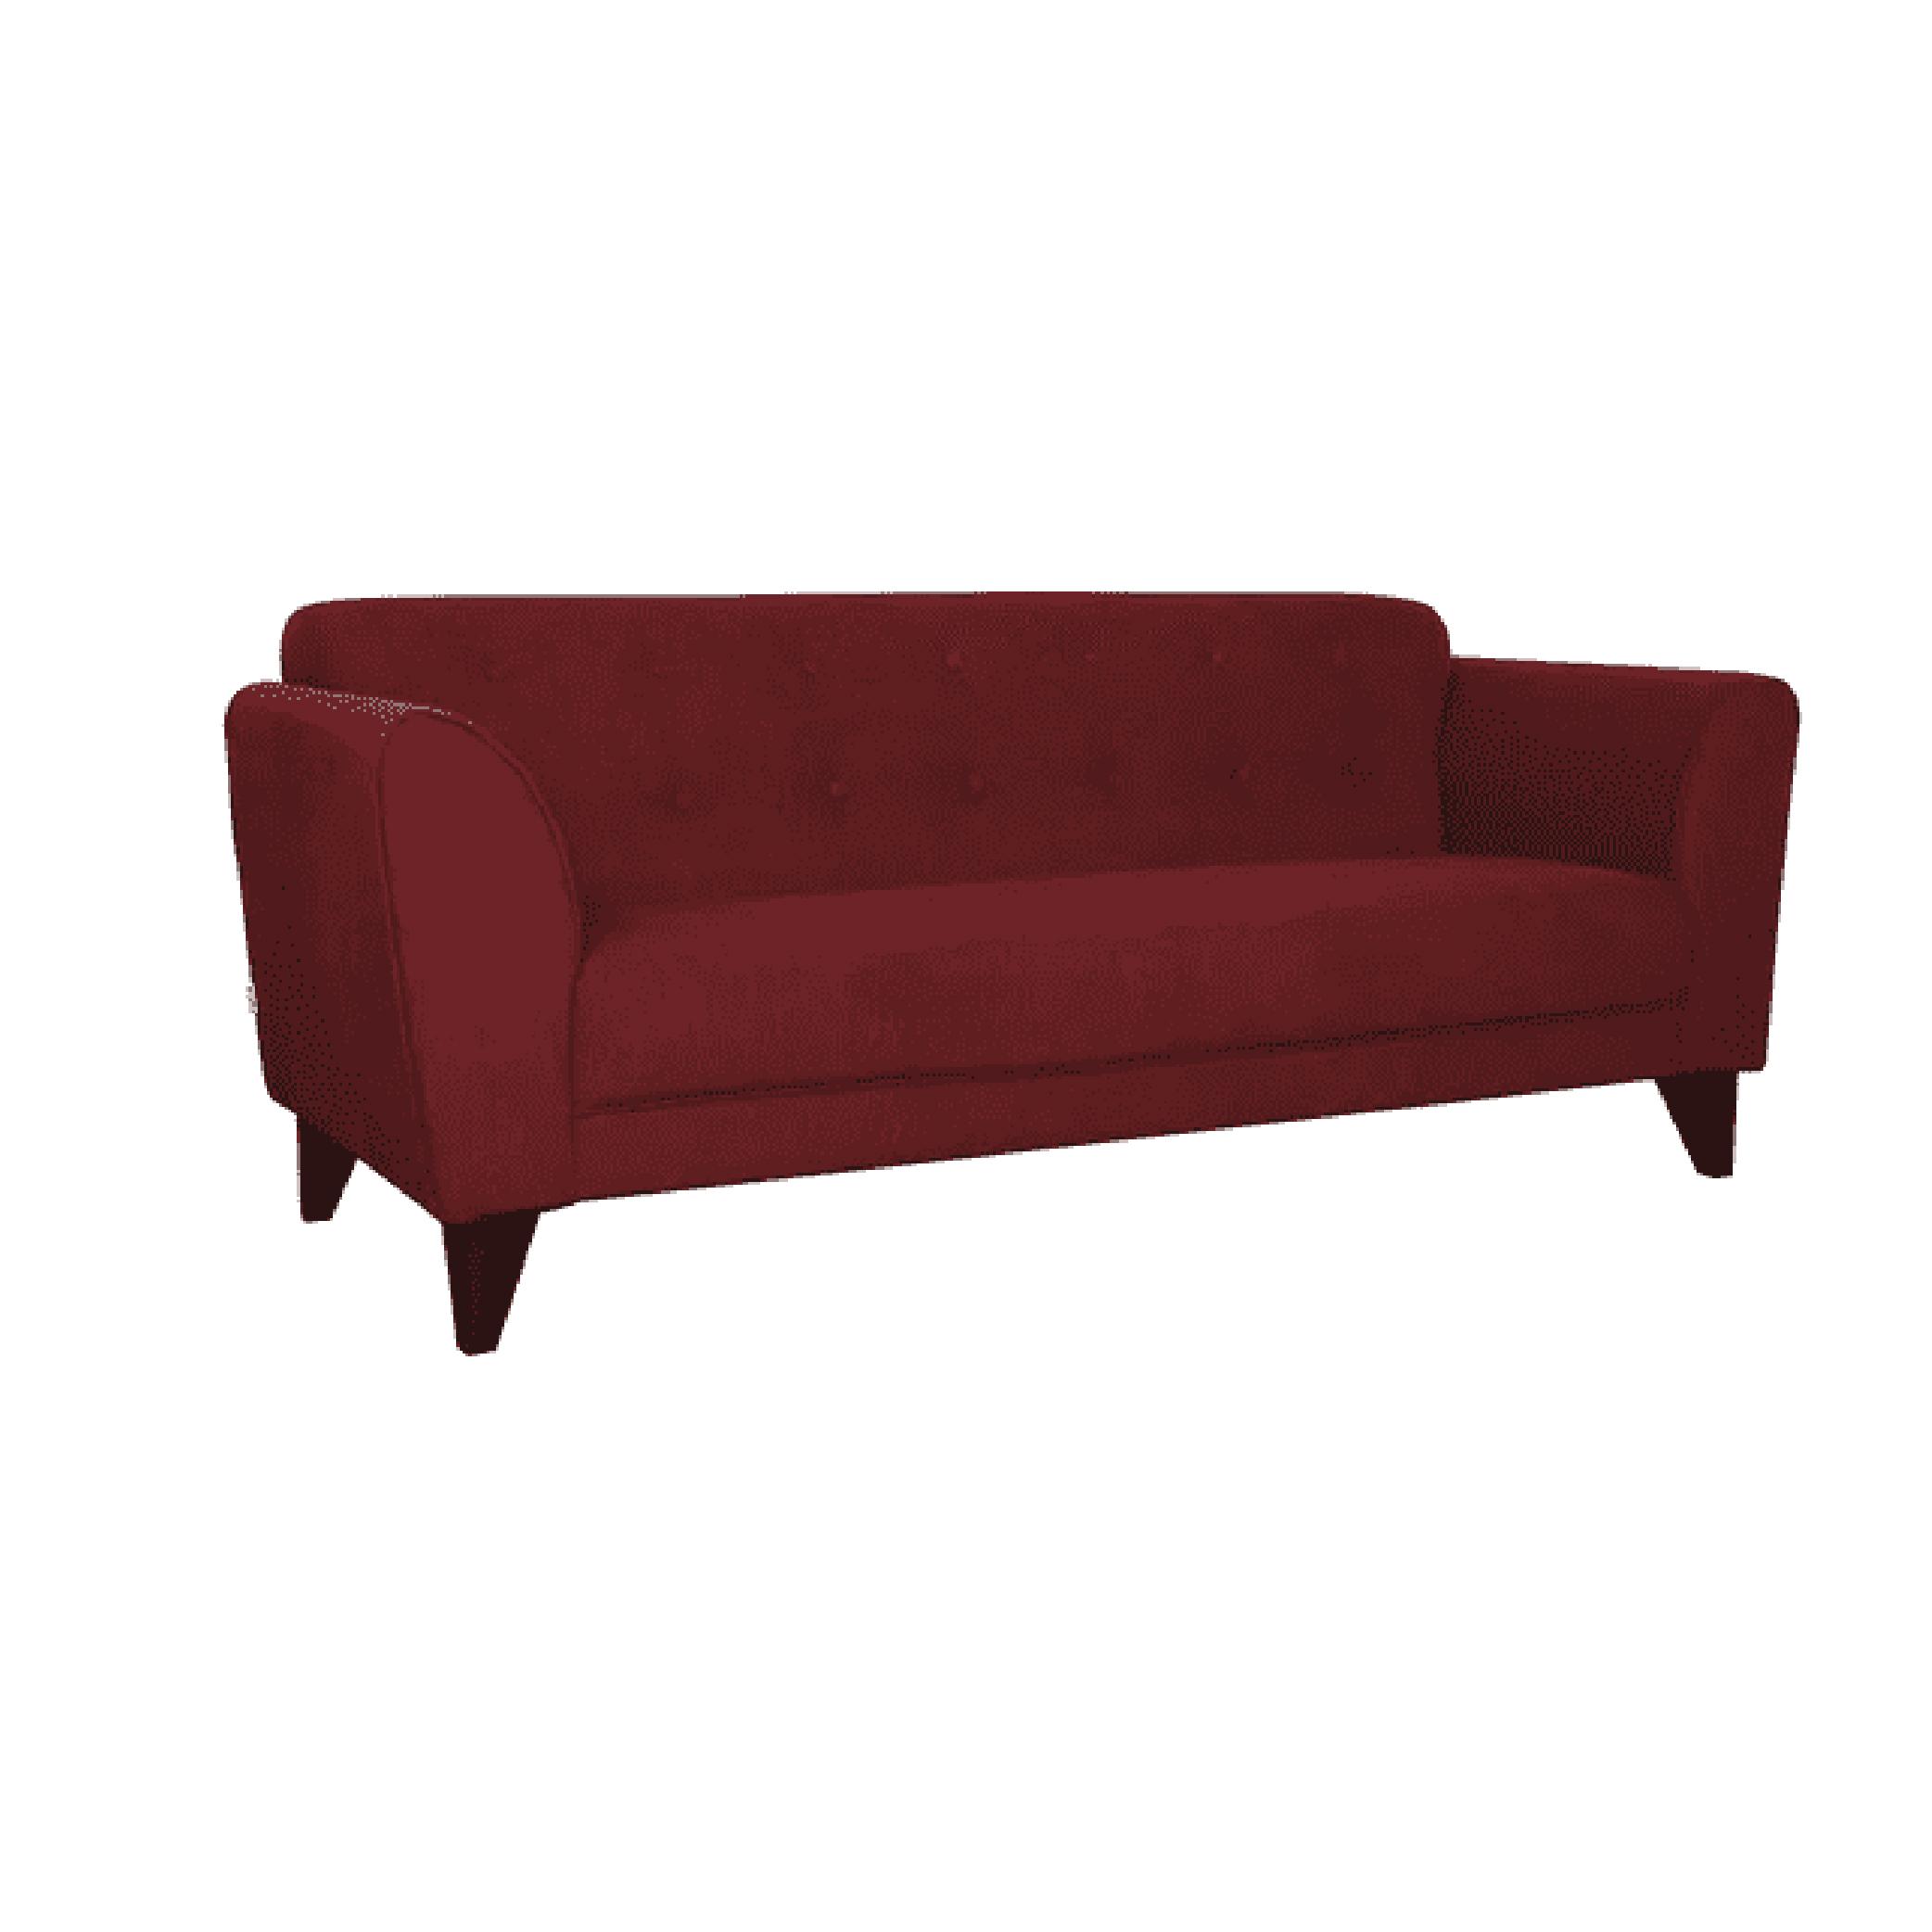 Ortici Three Seater Sofa in Garnet Red Color